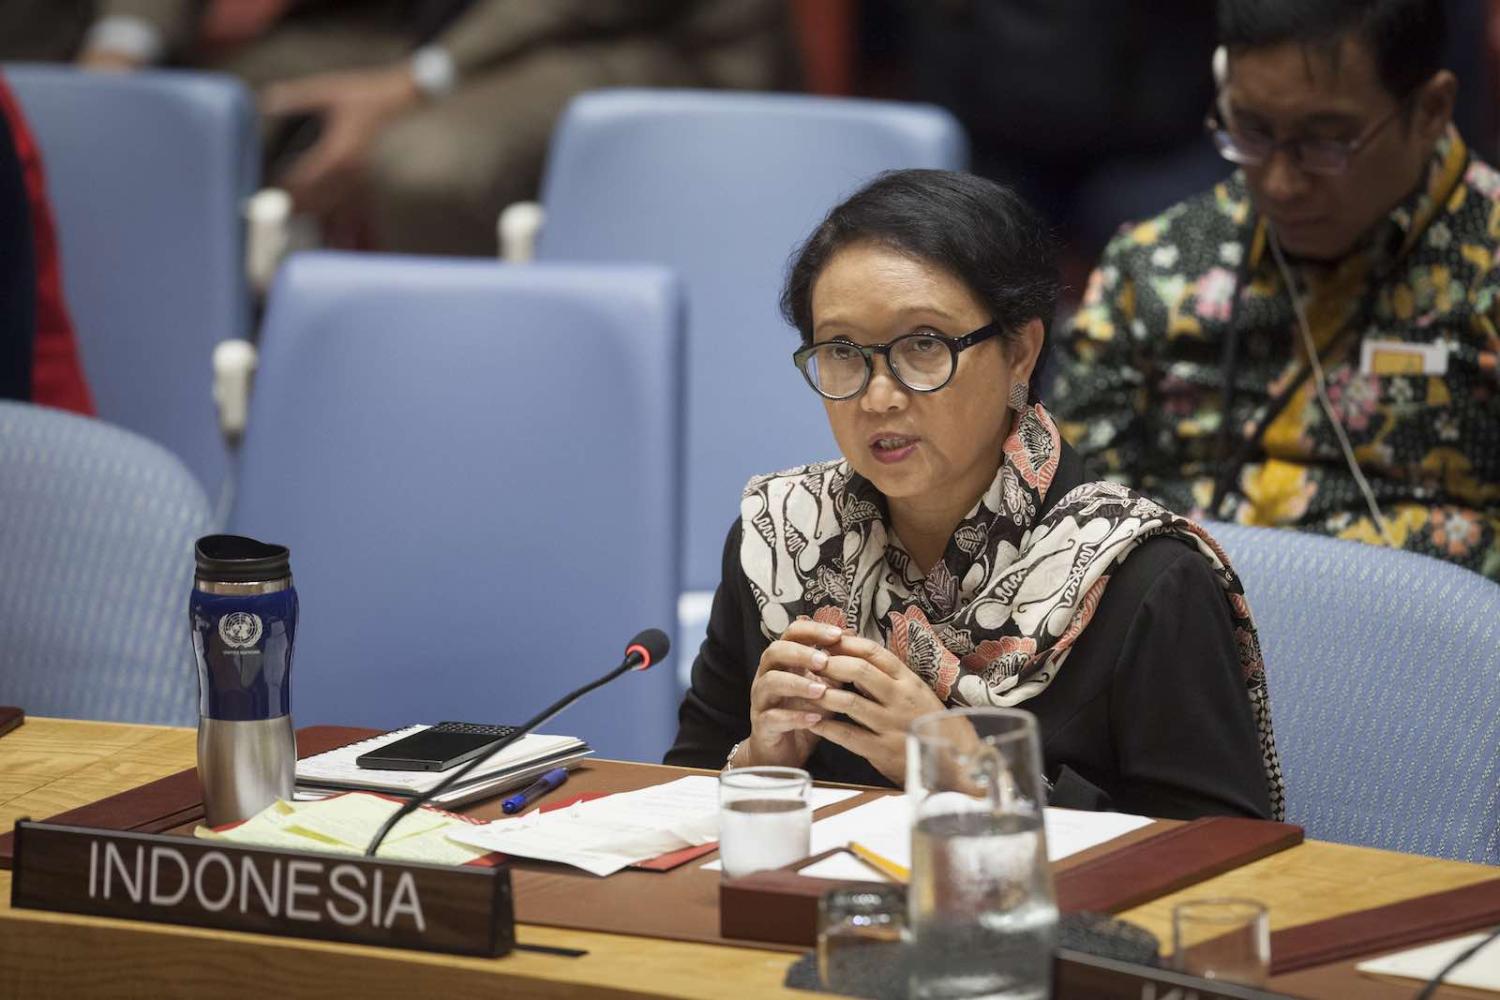 Indonesia’s Foreign Minister Retno Marsudi addresses the Security Council last year (Ariana Lindquist/UN Photo)